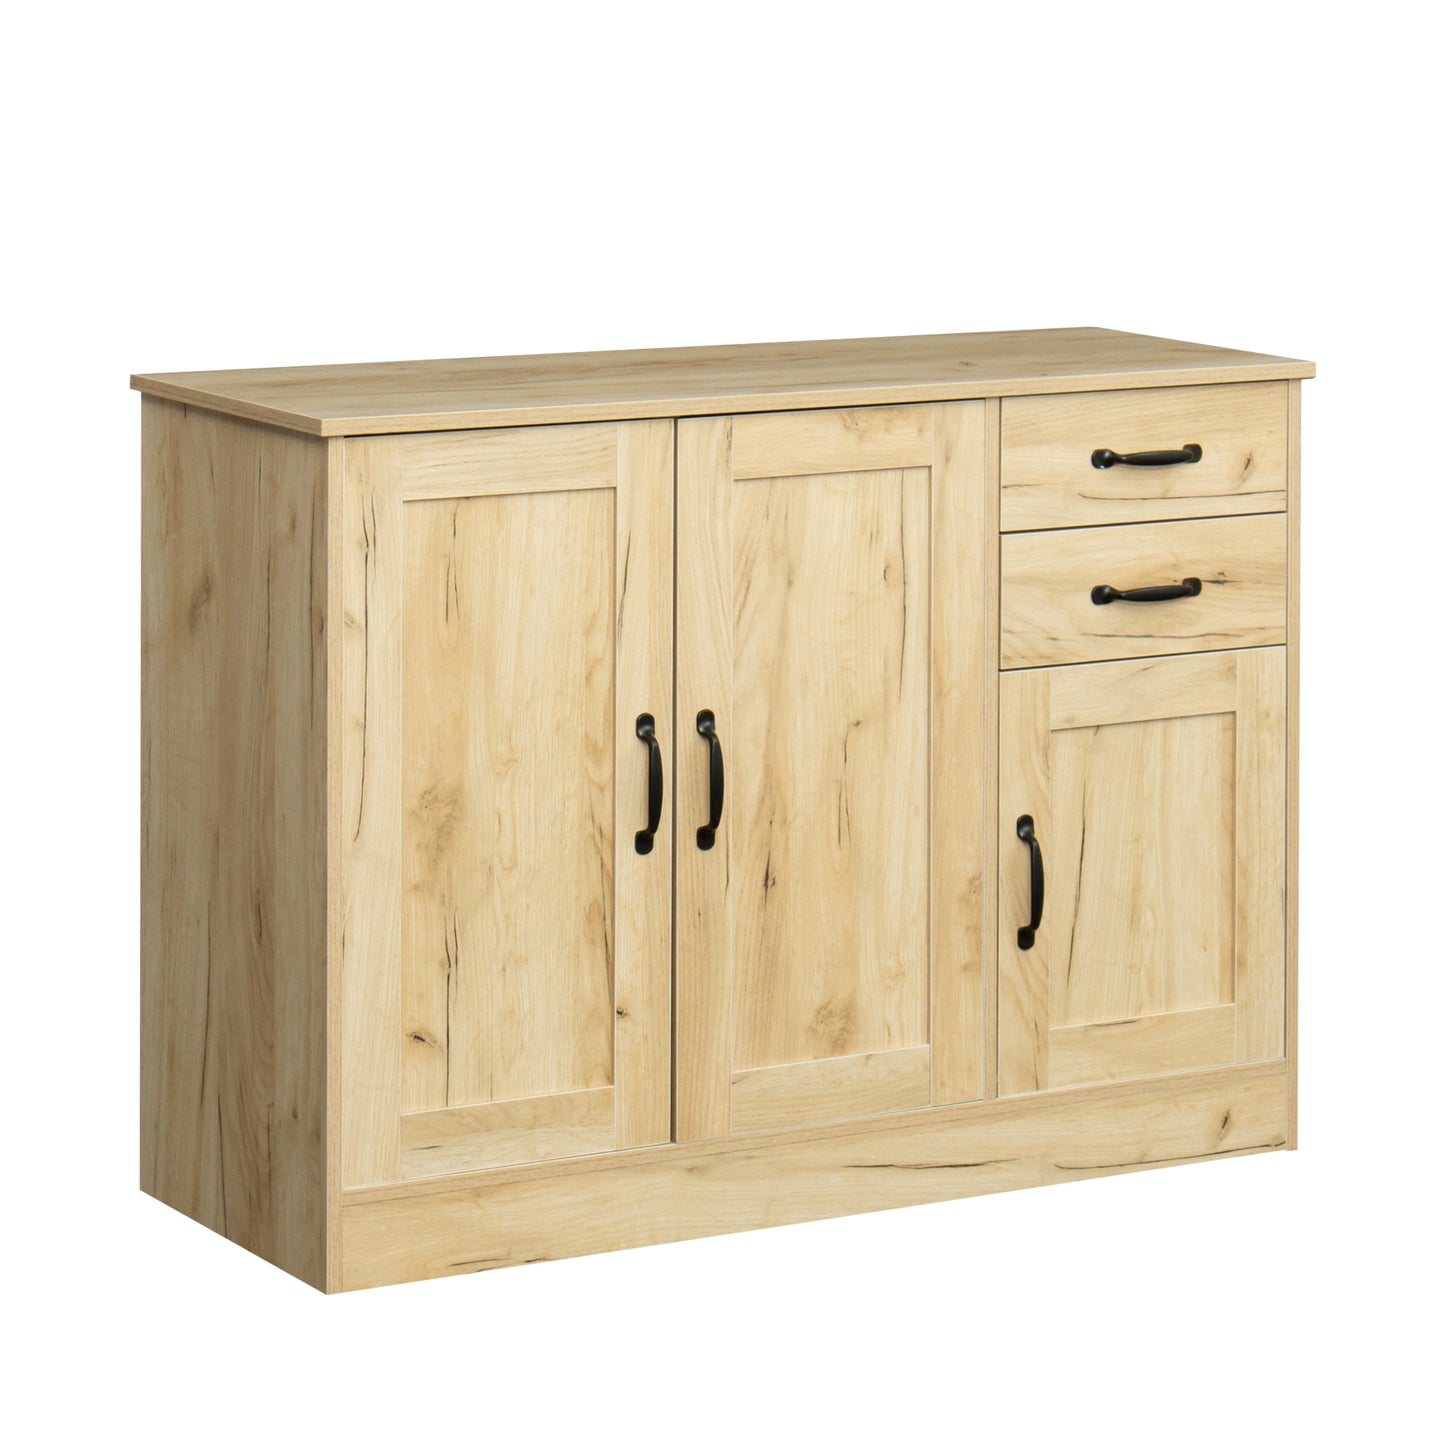 Wooden Sideboard with 3 doors and 2 drawers